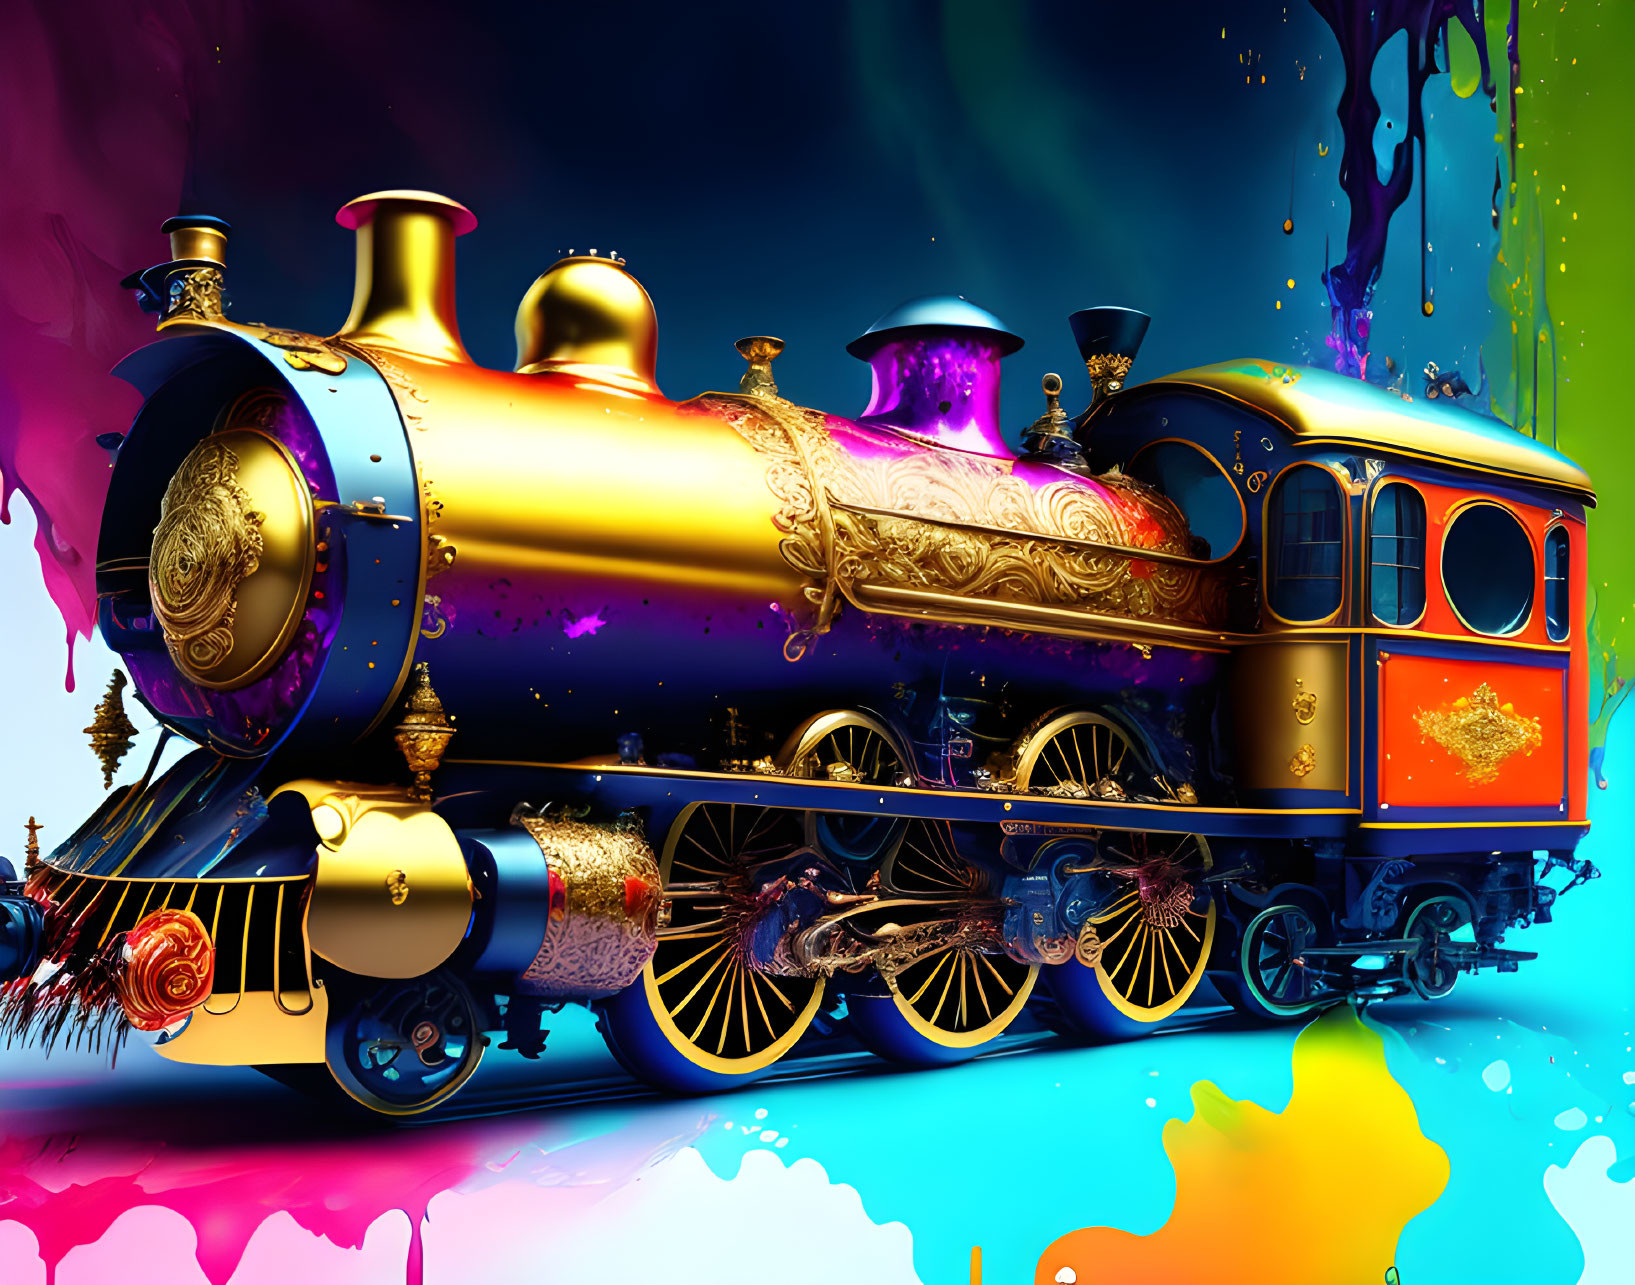 Colorful Fantasy Train with Golden Accents on Rainbow Background